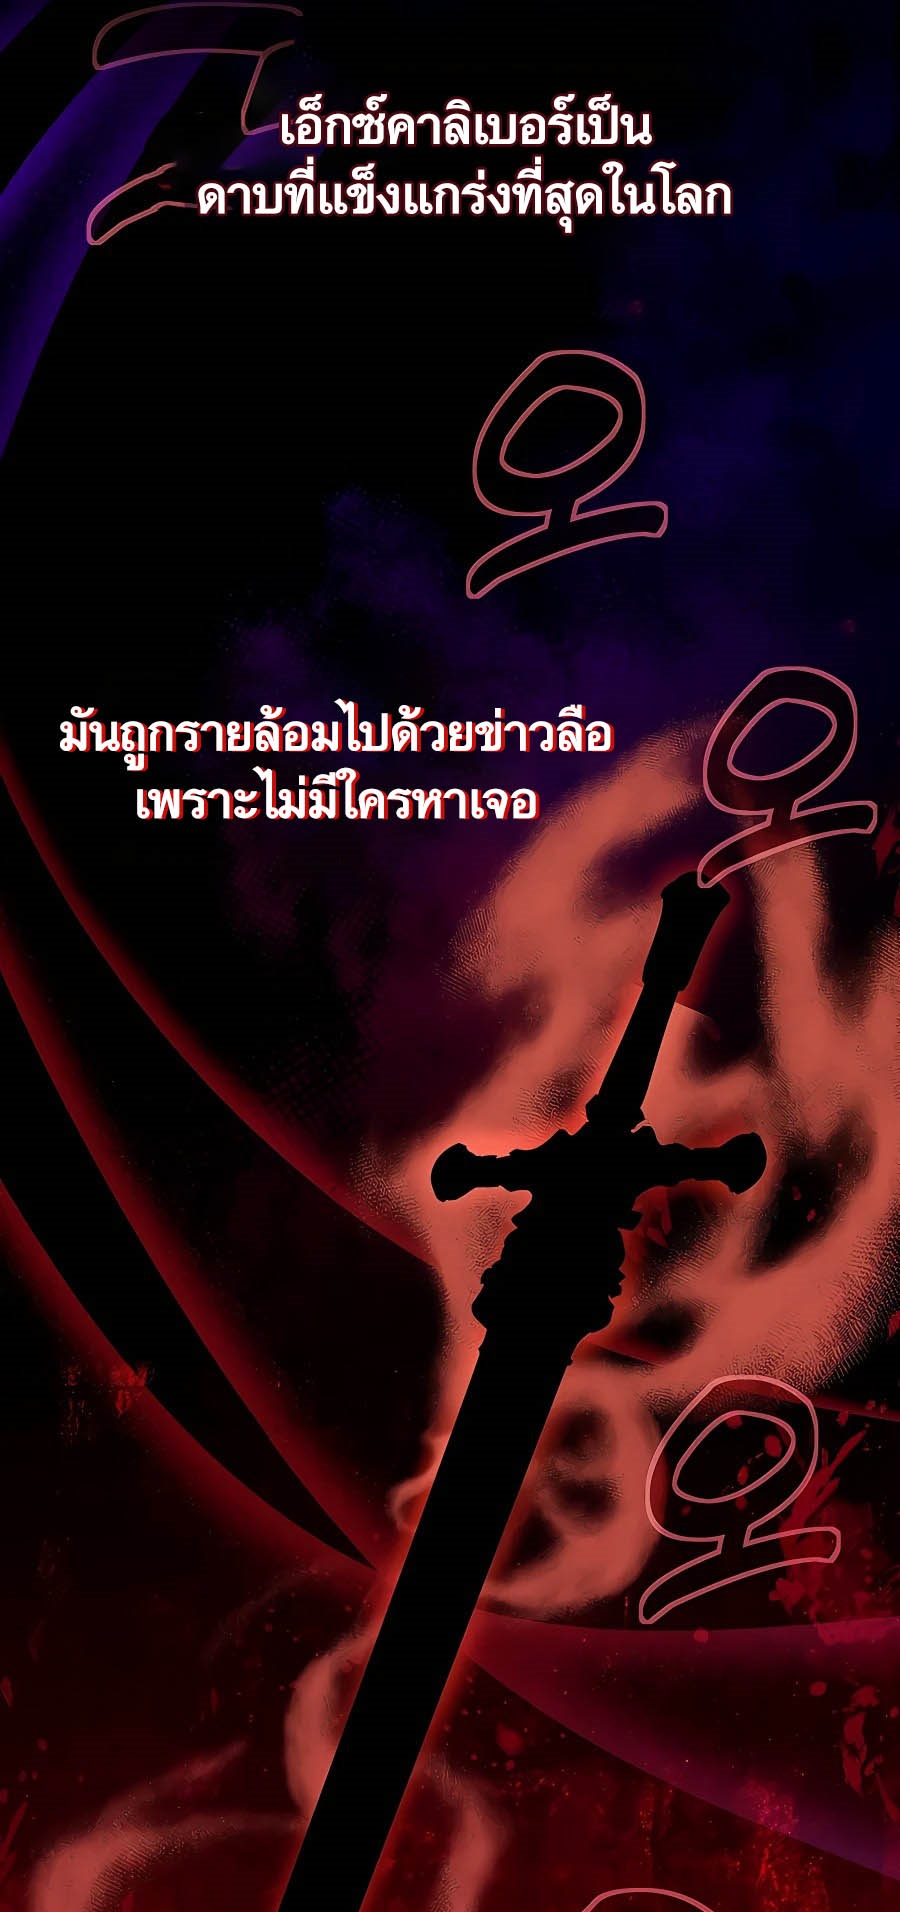 à¸­à¹ˆà¸²à¸™à¸¡à¸±à¸™à¸®à¸§à¸² à¹€à¸£à¸·à¹ˆà¸­à¸‡ The Part Time Land of the Gods 56 28